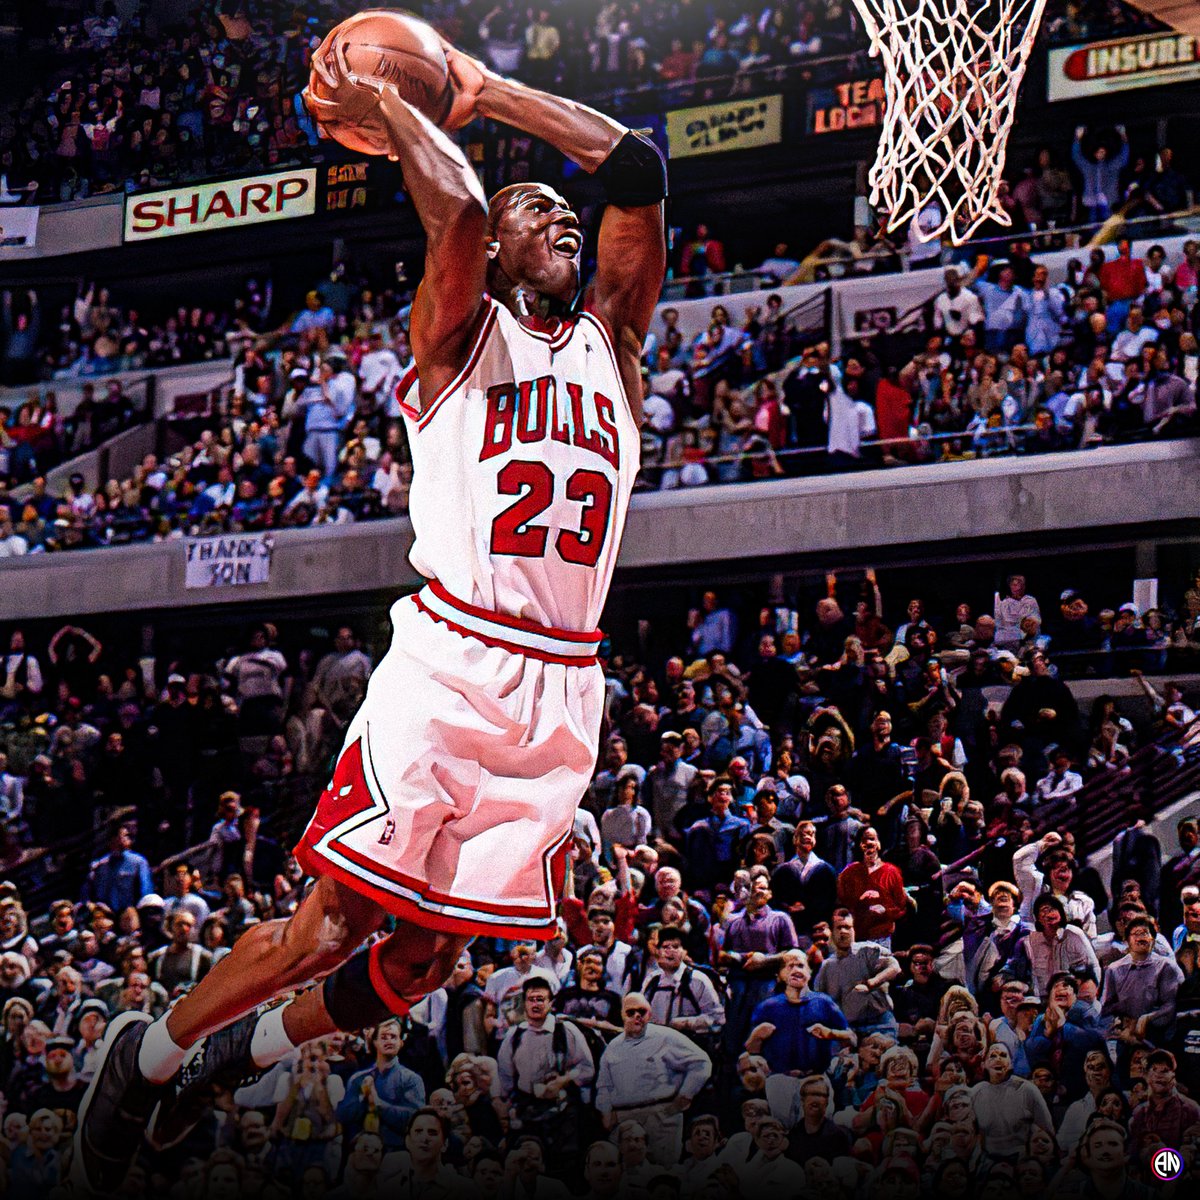 How many PPG would Michael Jordan average in today's #NBA? 